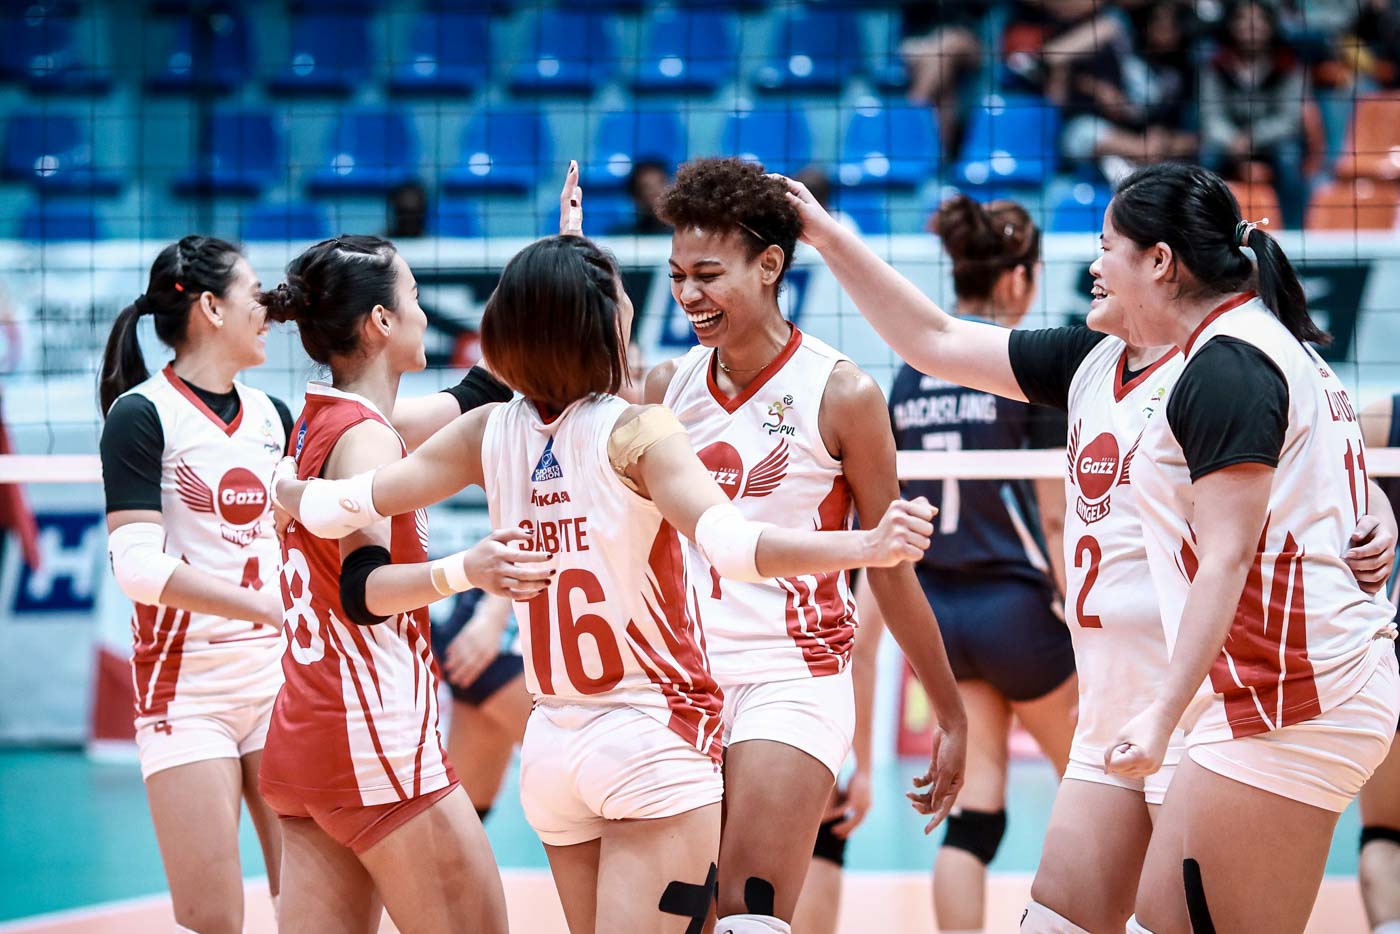 MISSION ACCOMPLISHED. The PetroGazz Angels wrap up their elimination run with a convincing win. Photo by Michael Gatpandan/Rappler 